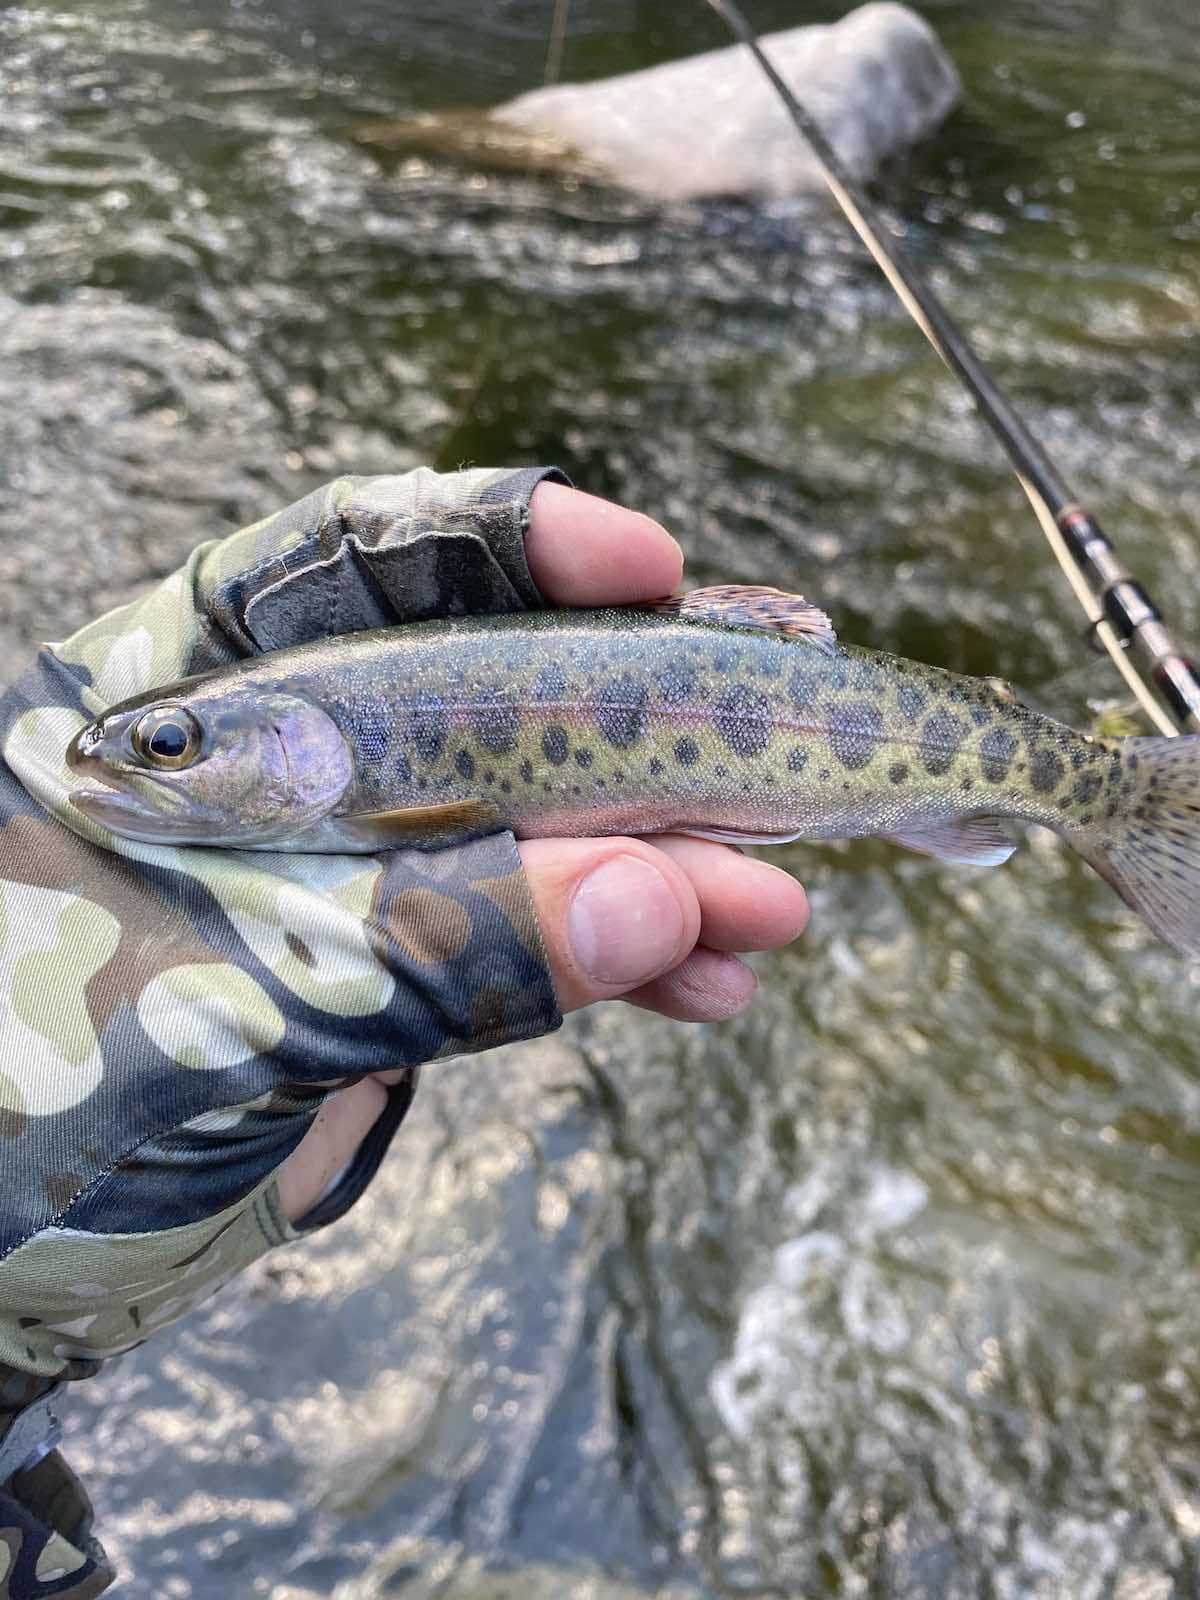 Juvenile rainbow trout caught on fly in idaho